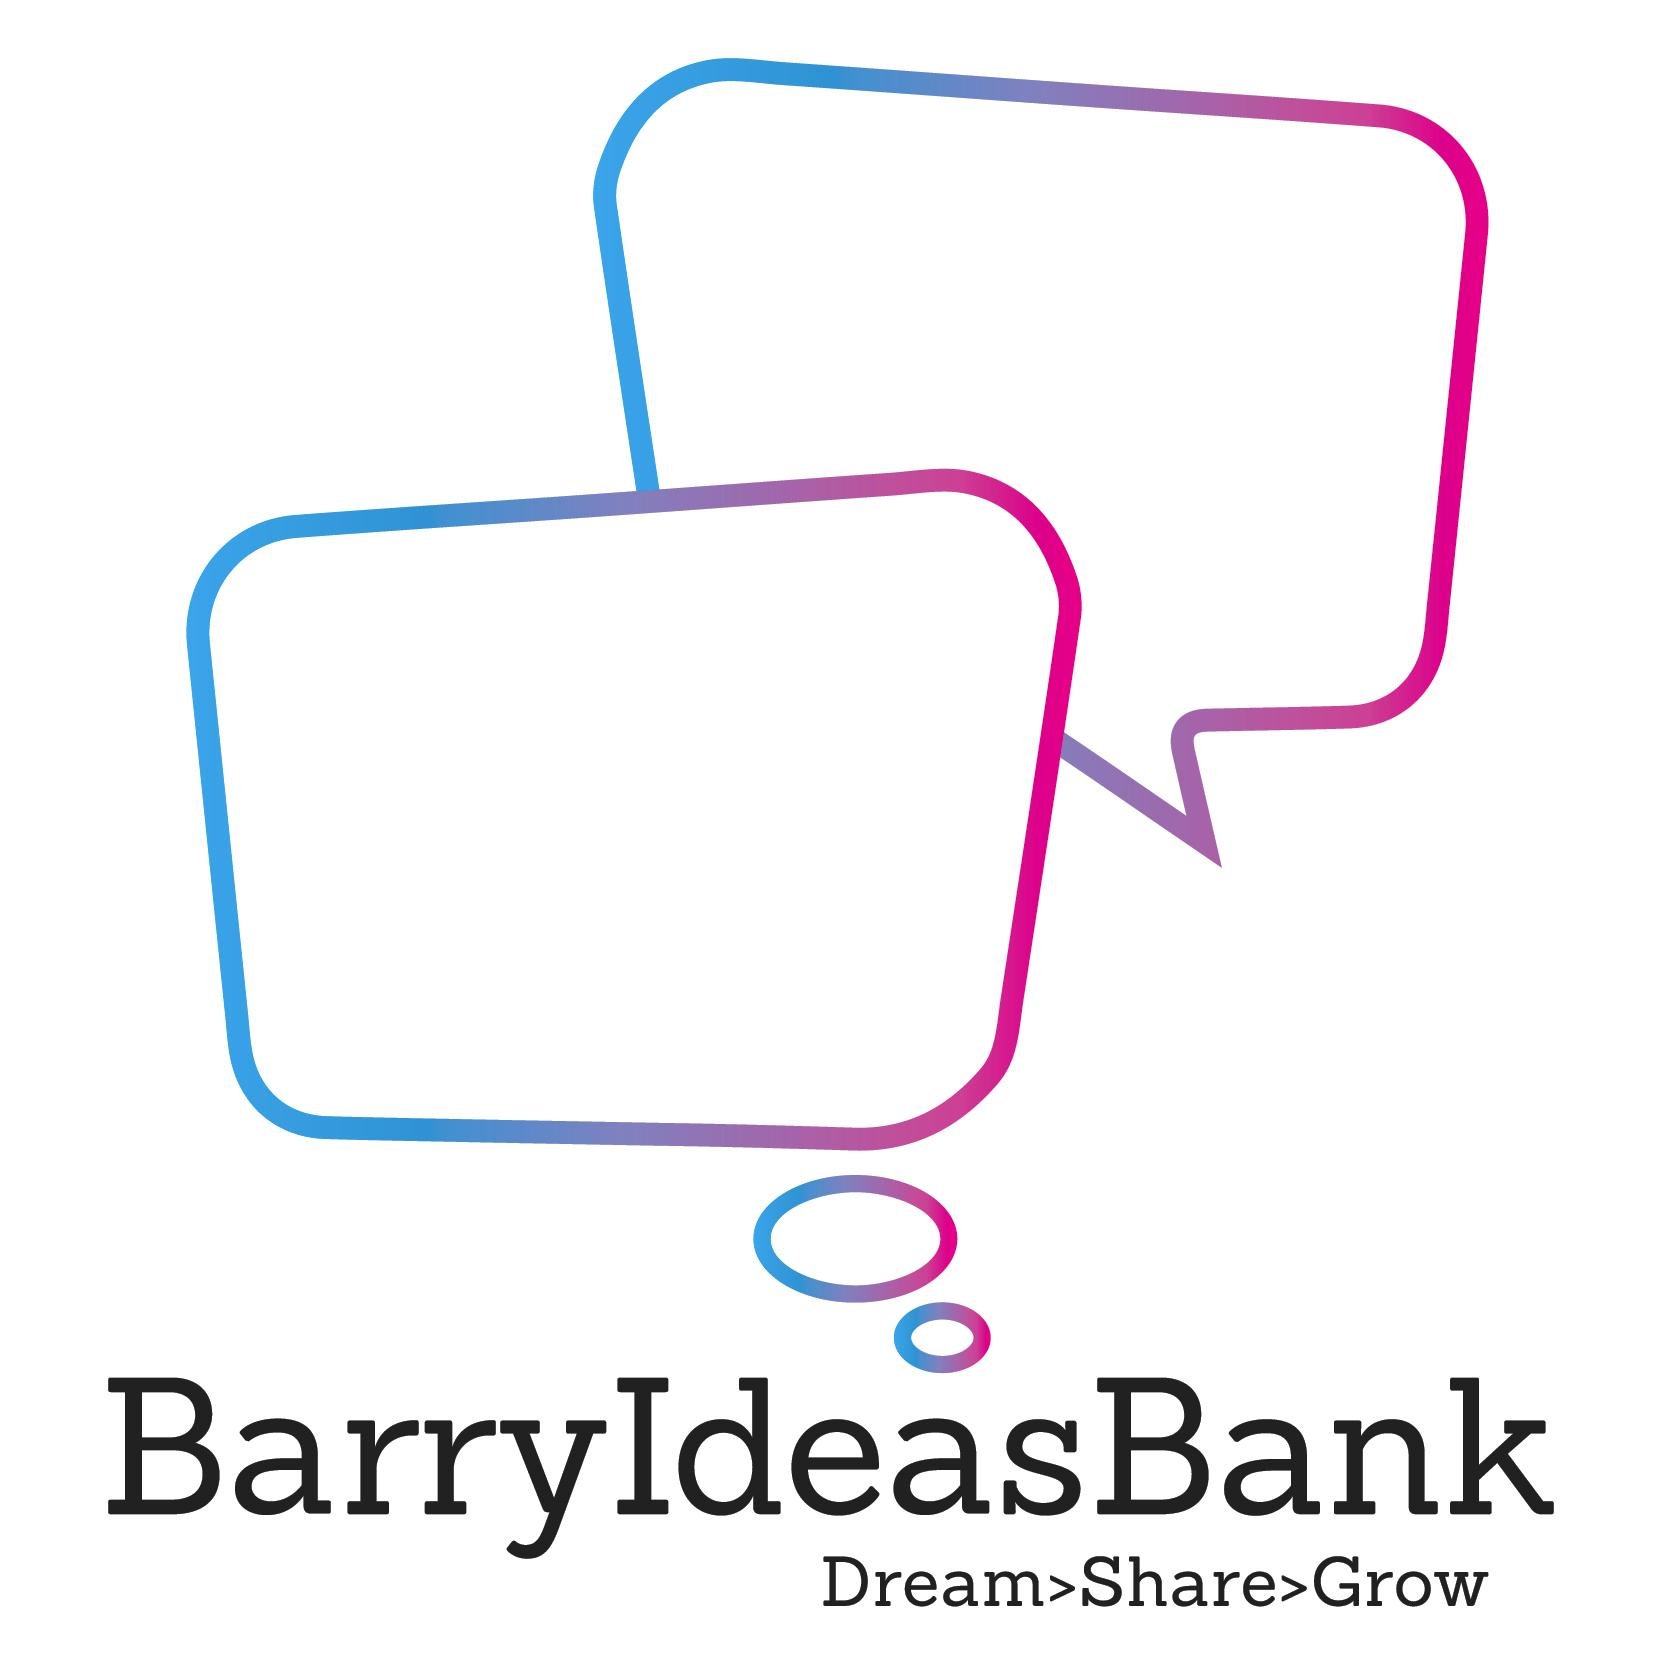 Barry IdeasBank operated 2015-7 to promote new ideas to make Barry even better. We keep its spirit of co-creation and collaboration alive #SocialCapital